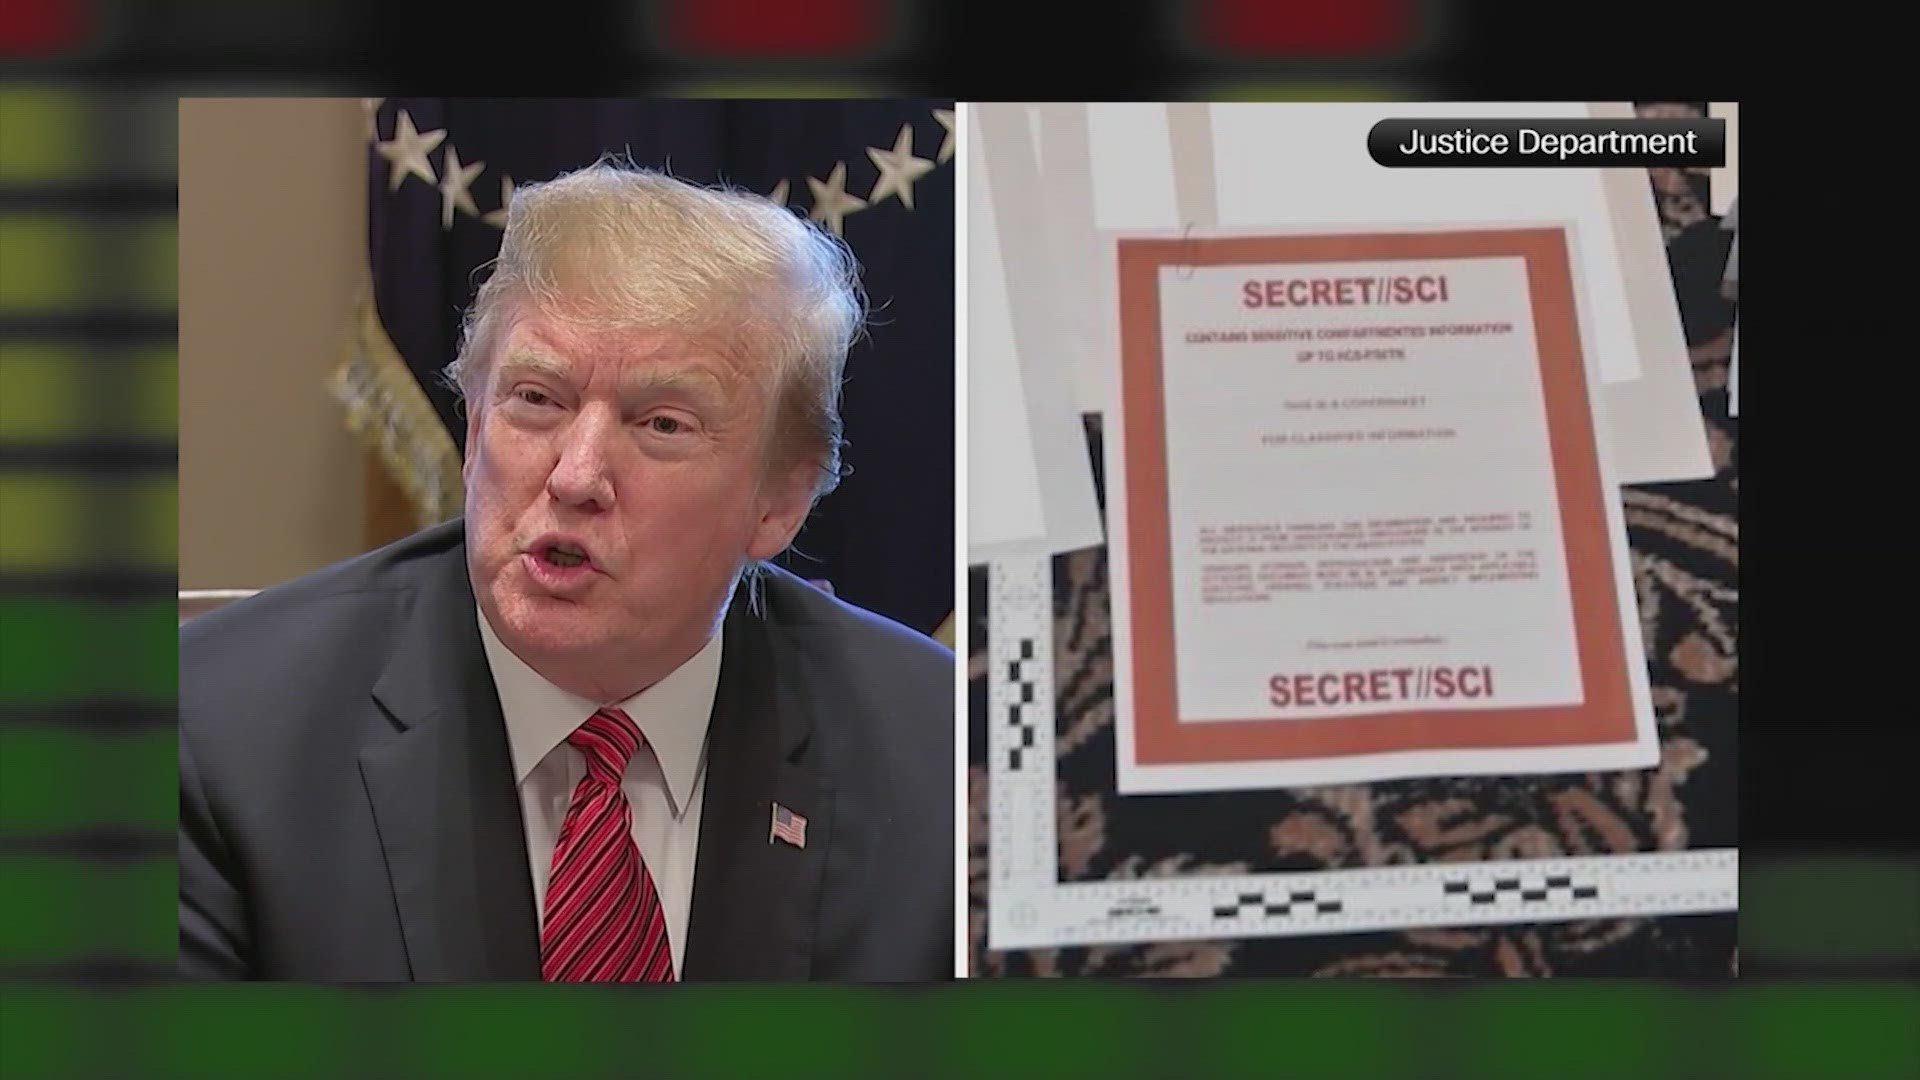 Inside the multiple-page indictment are shocking details of Trump taking classified documents relating to national defense.